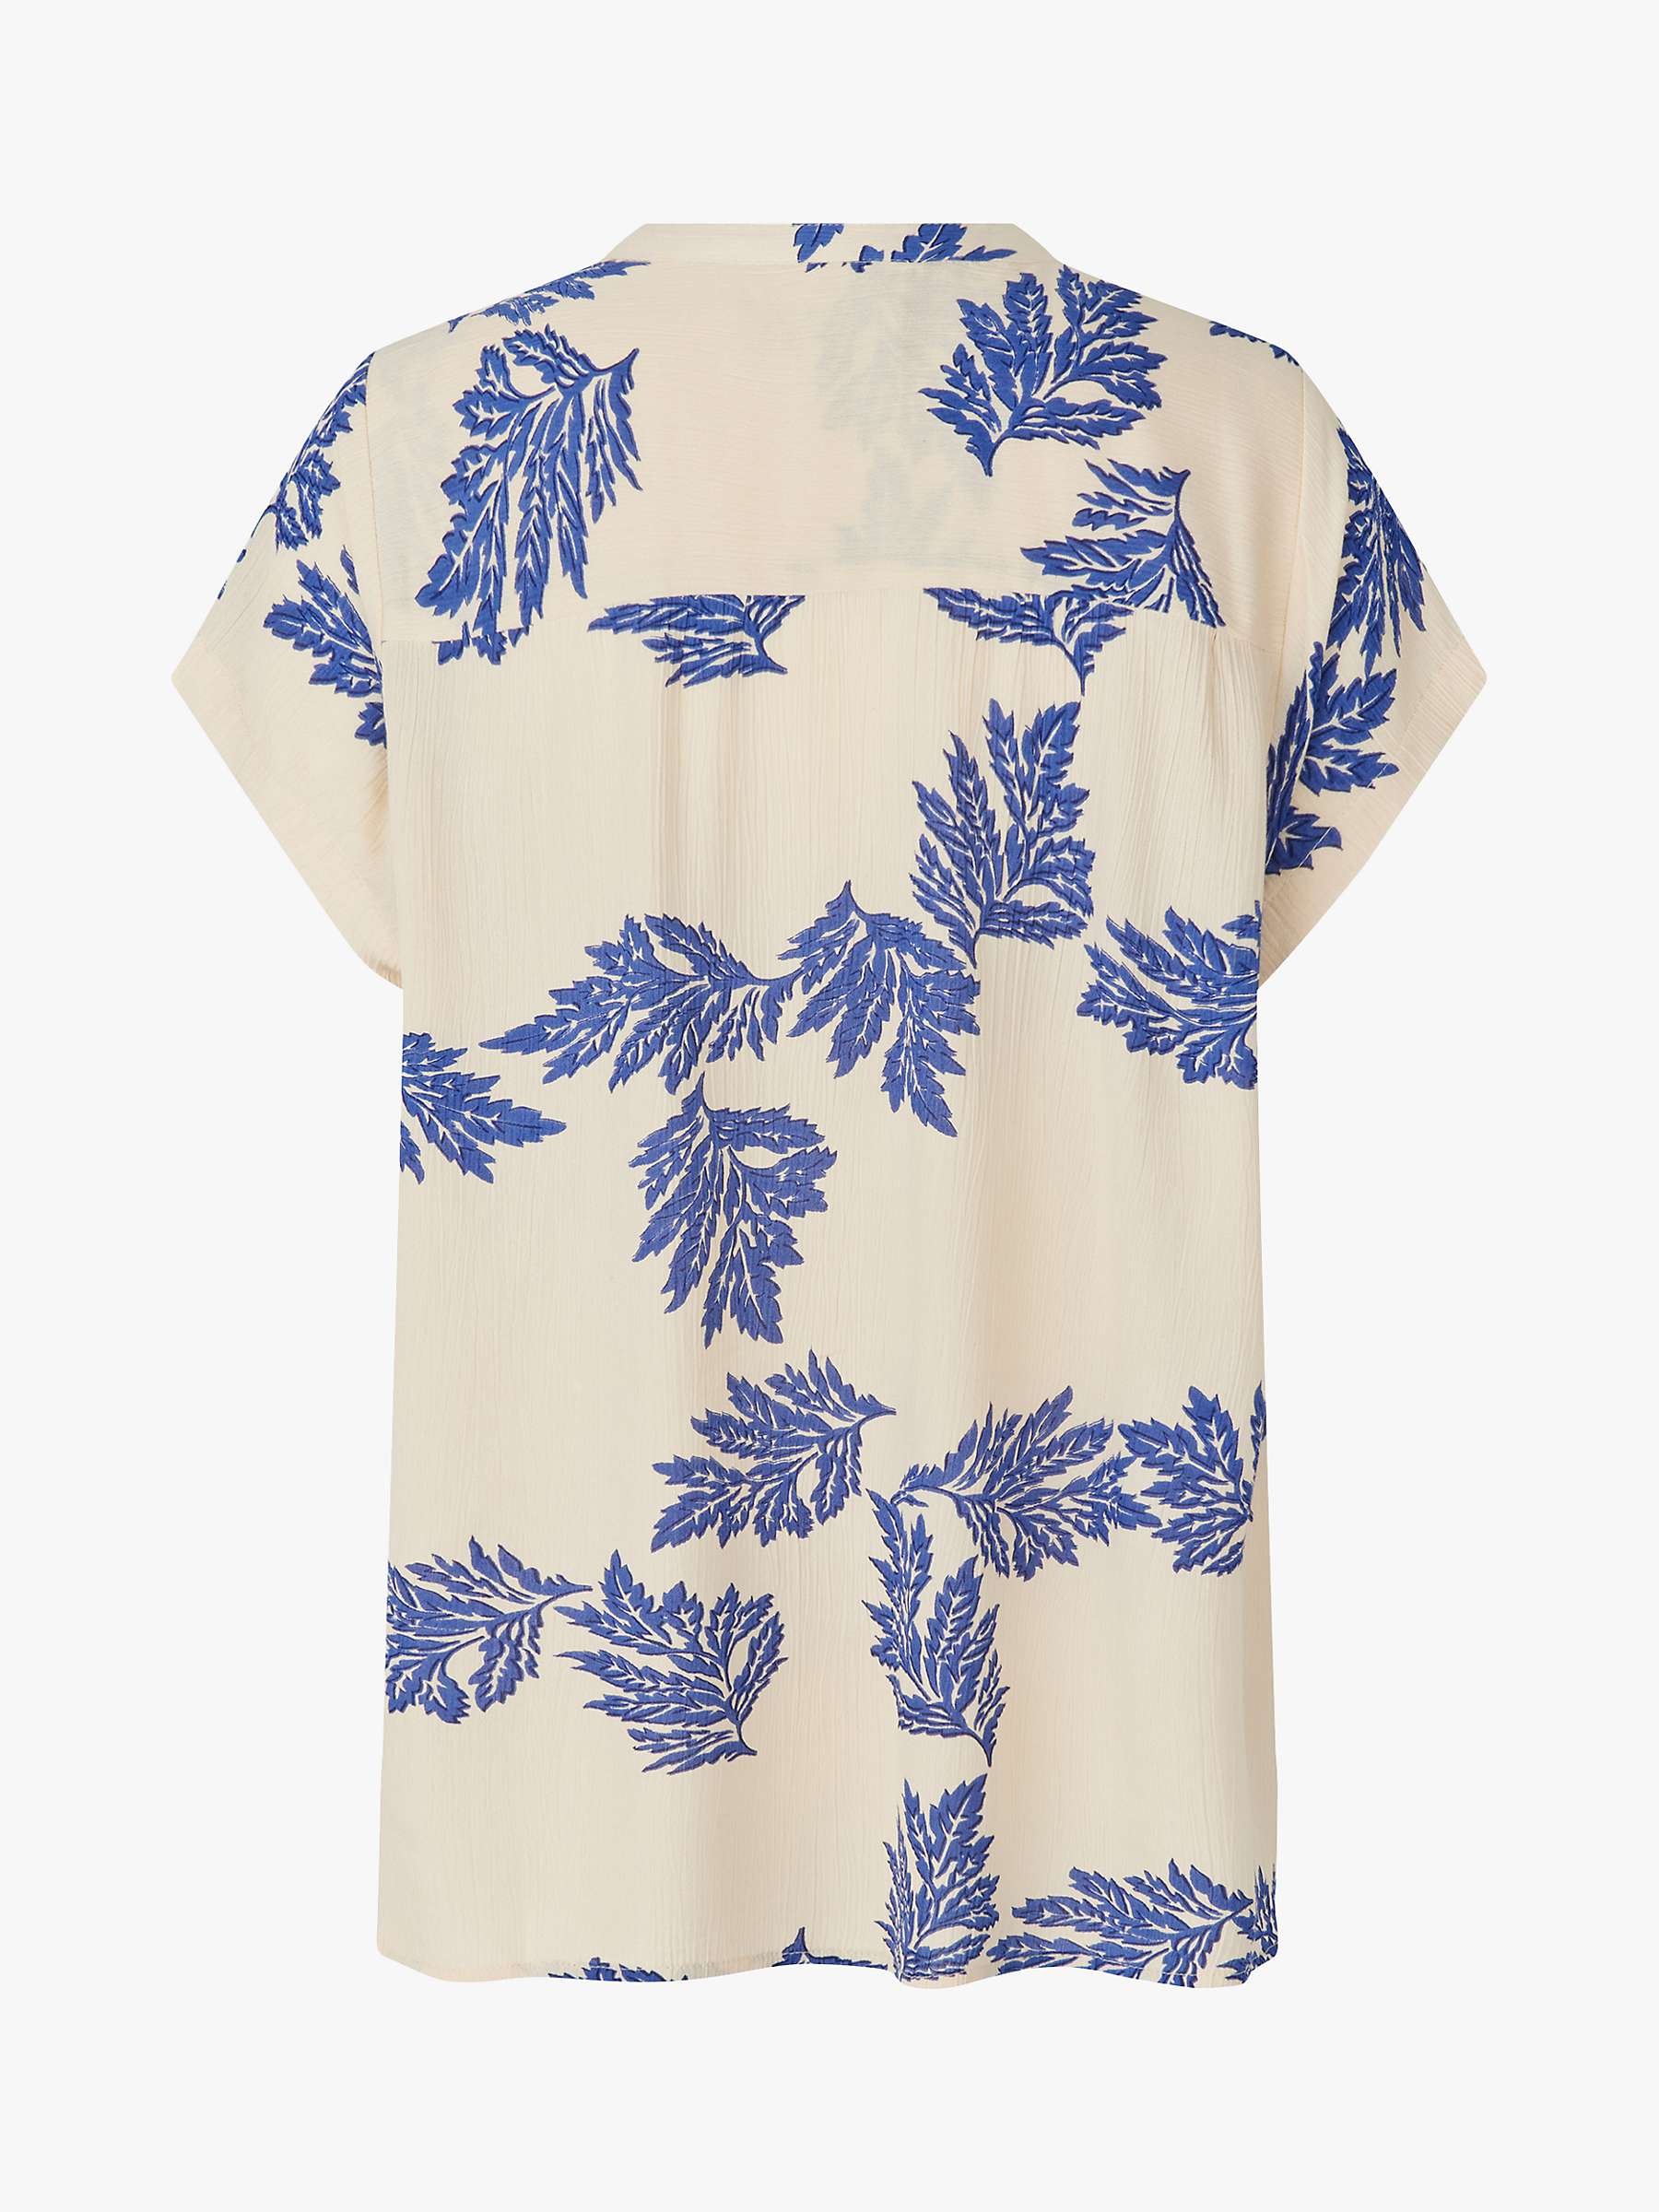 Buy Lollys Laundry Heather Loose Fit Print Top, Blue/White Online at johnlewis.com